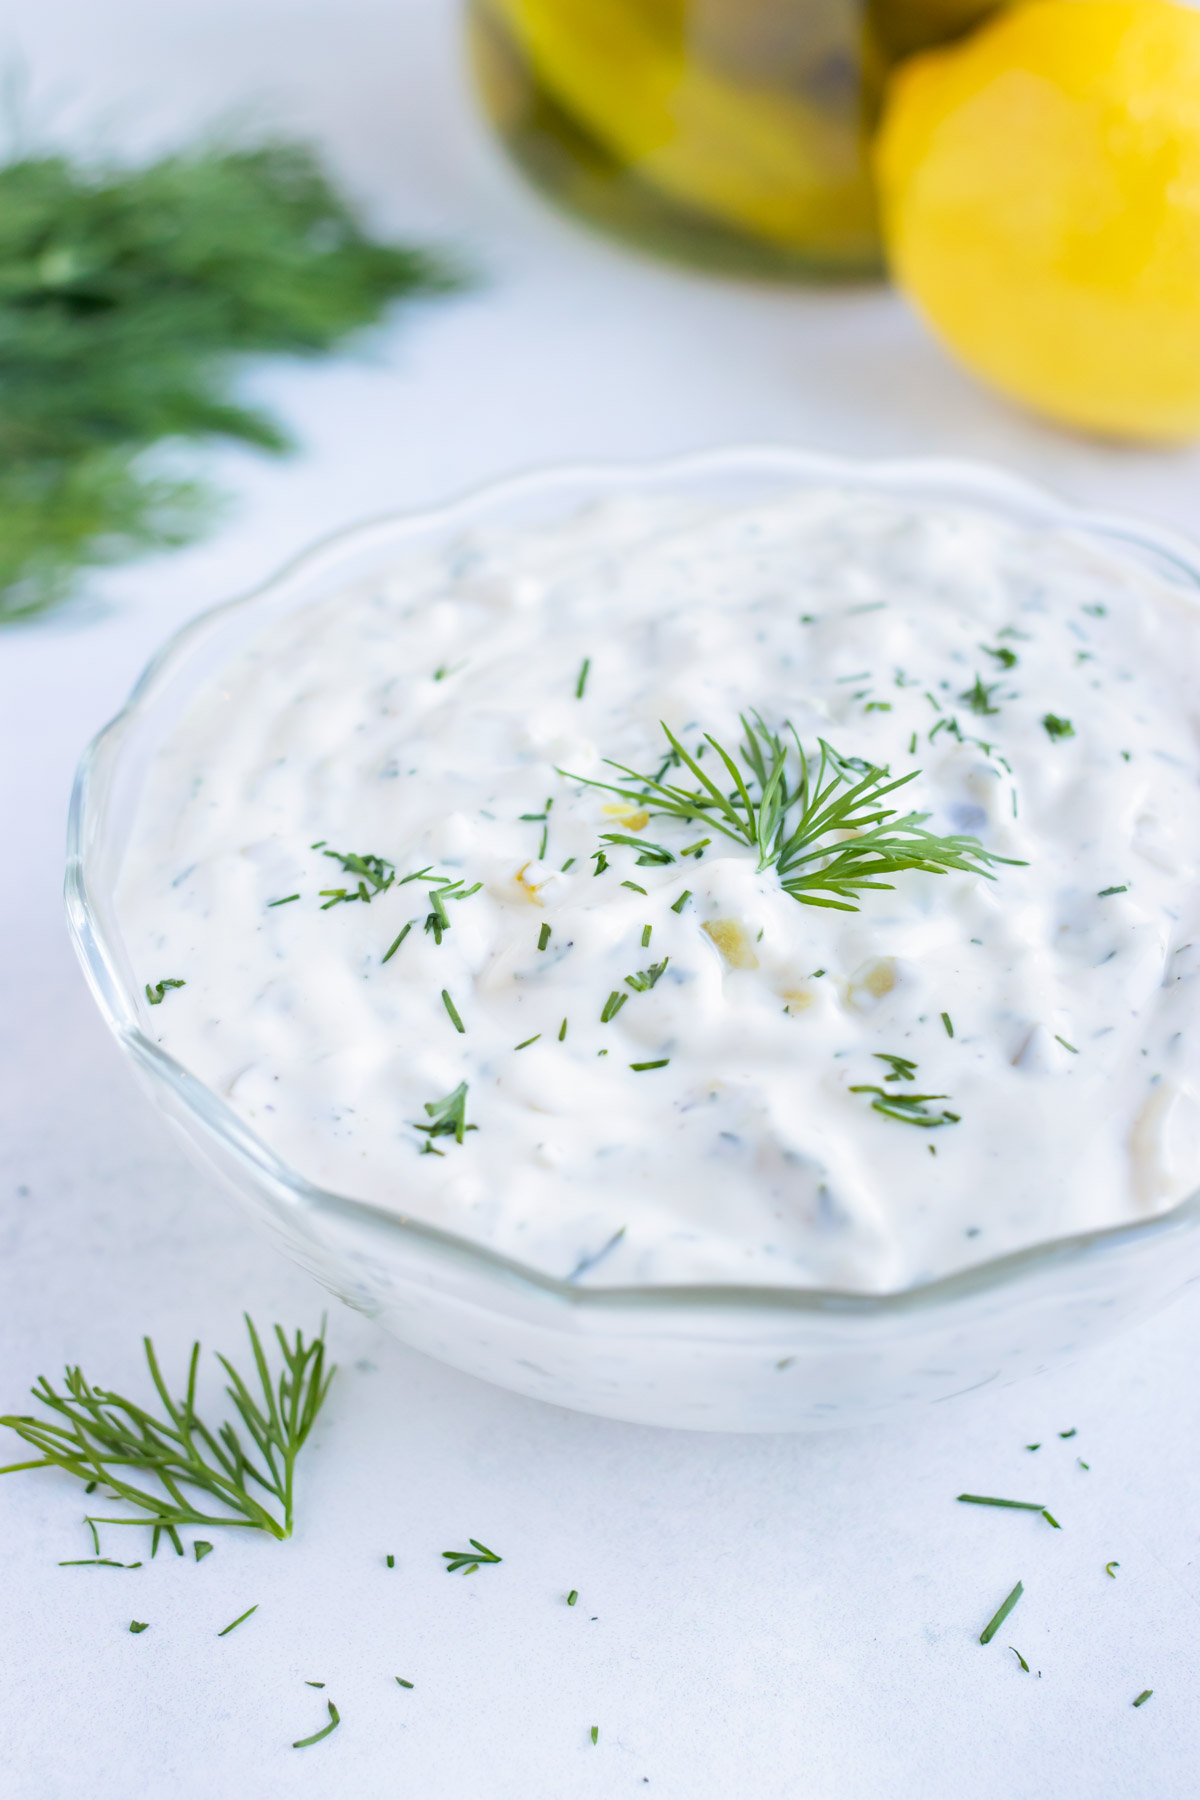 Fresh dill is placed on top of homemade tartar sauce recipe.